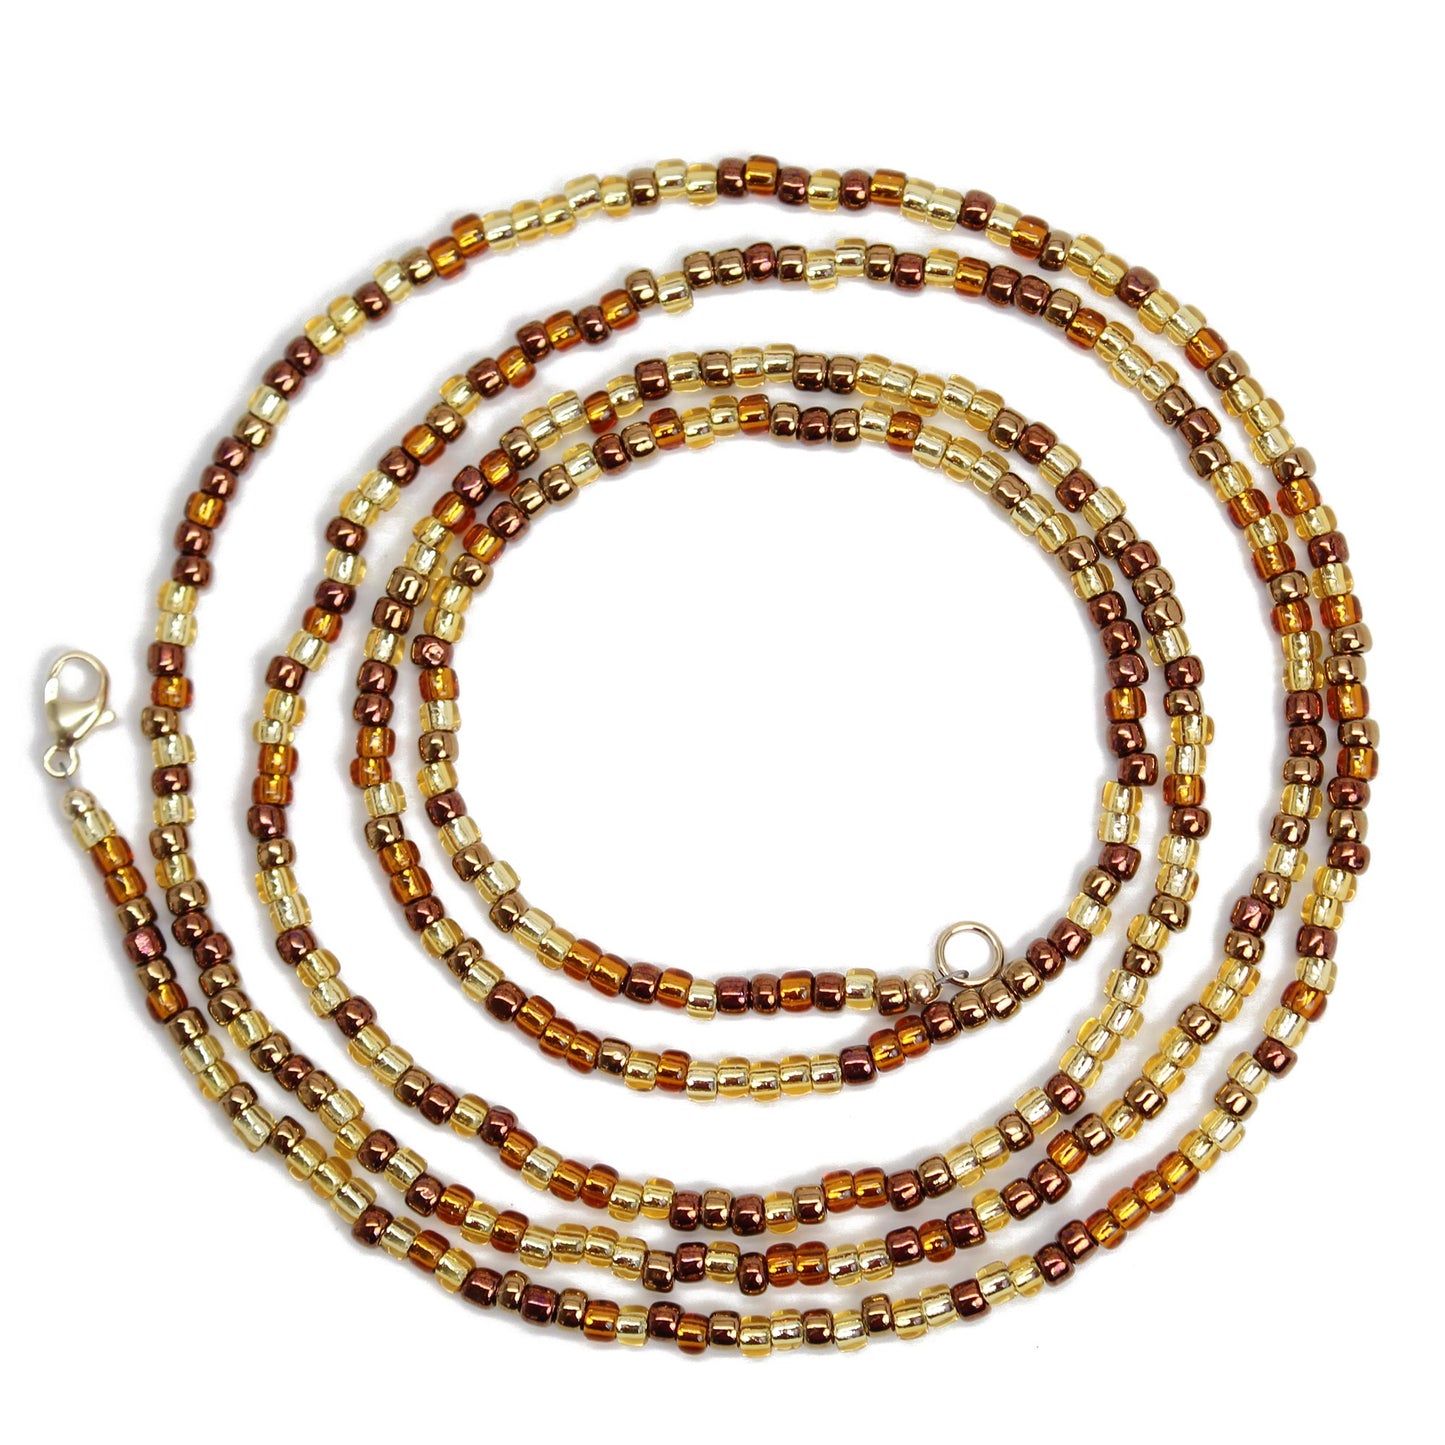 Mixed Gold Copper Bronze Seed Bead Necklace, Thin 2mm Single Strand 18